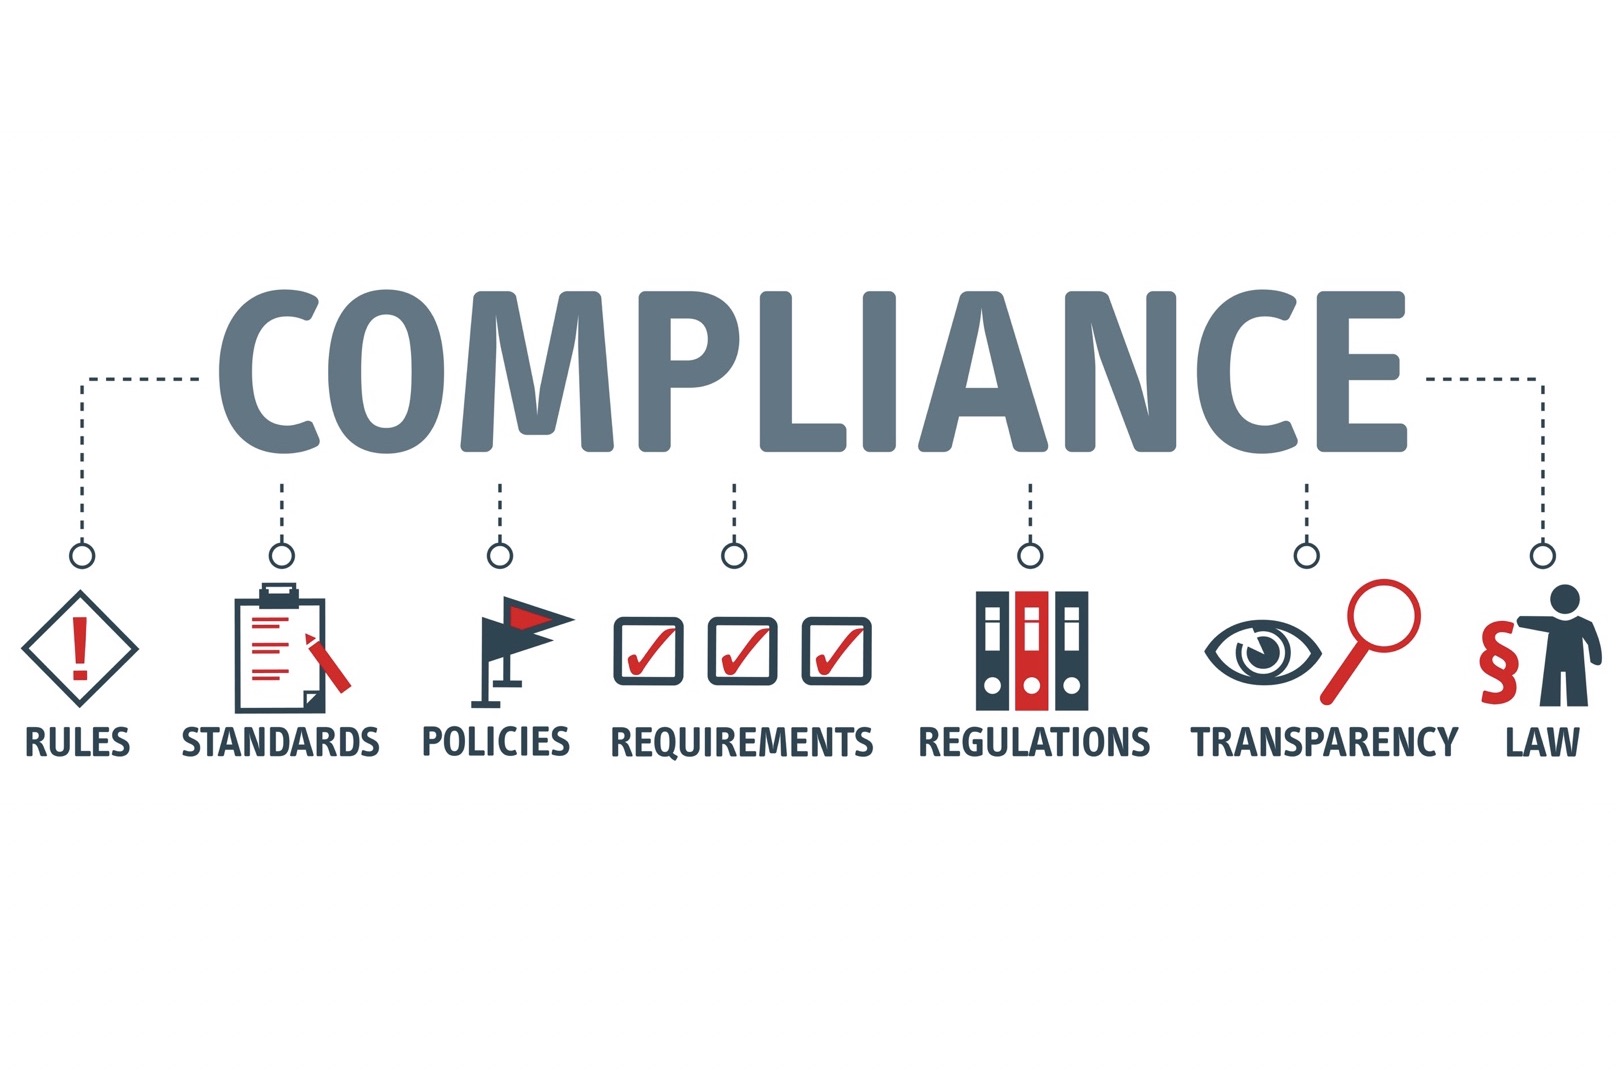 C169-1530108701_Compliance-HowtocomplywithMAIN.jpg